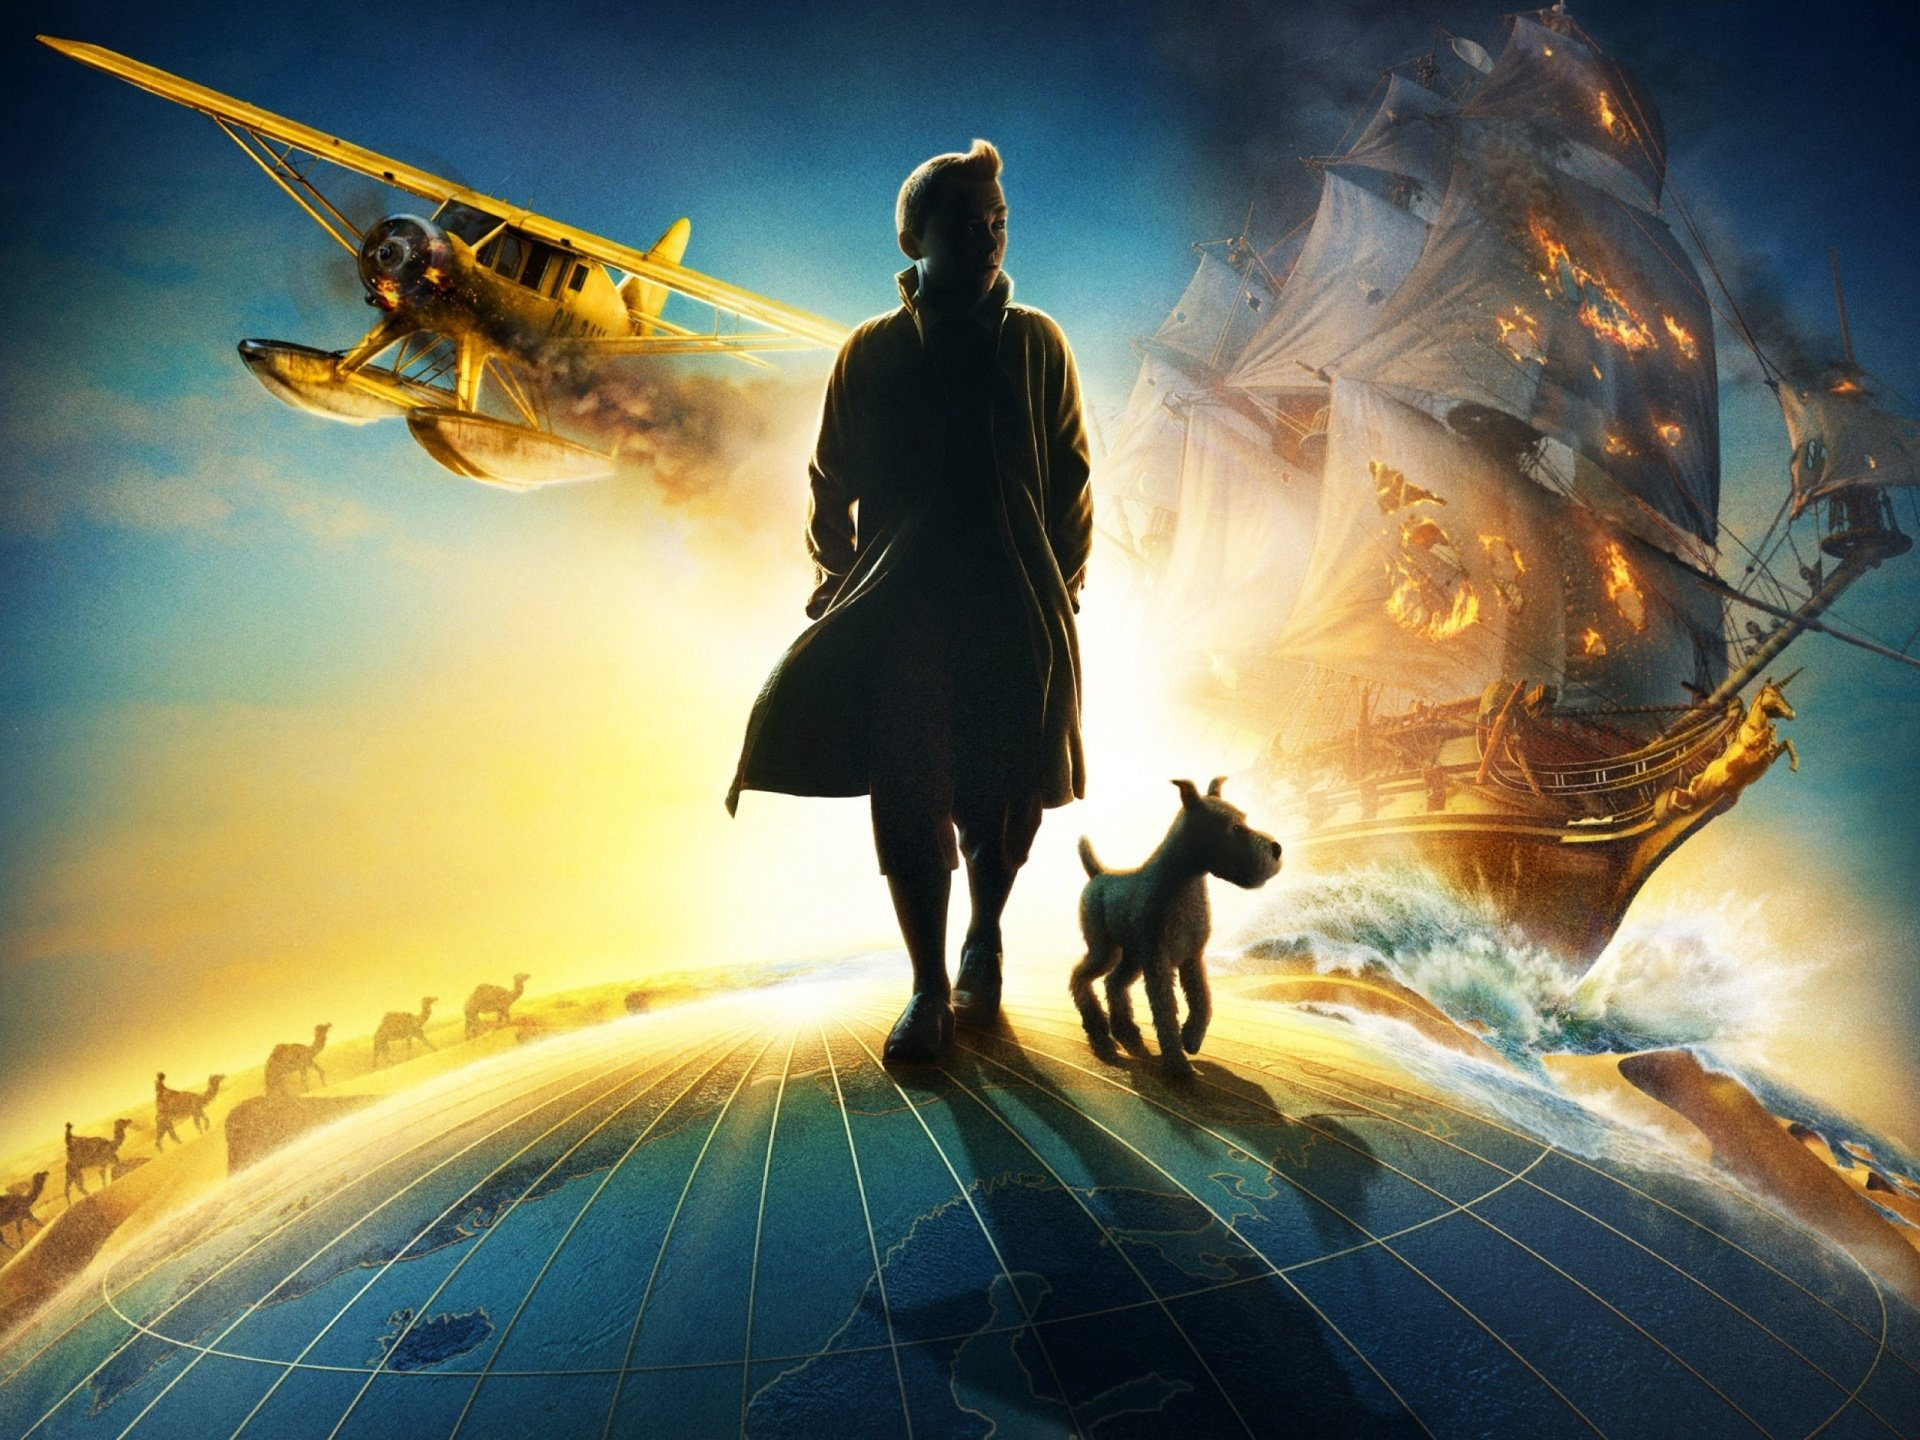 1920x1440 10+ The Adventures Of Tintin HD Wallpapers and Backgrounds